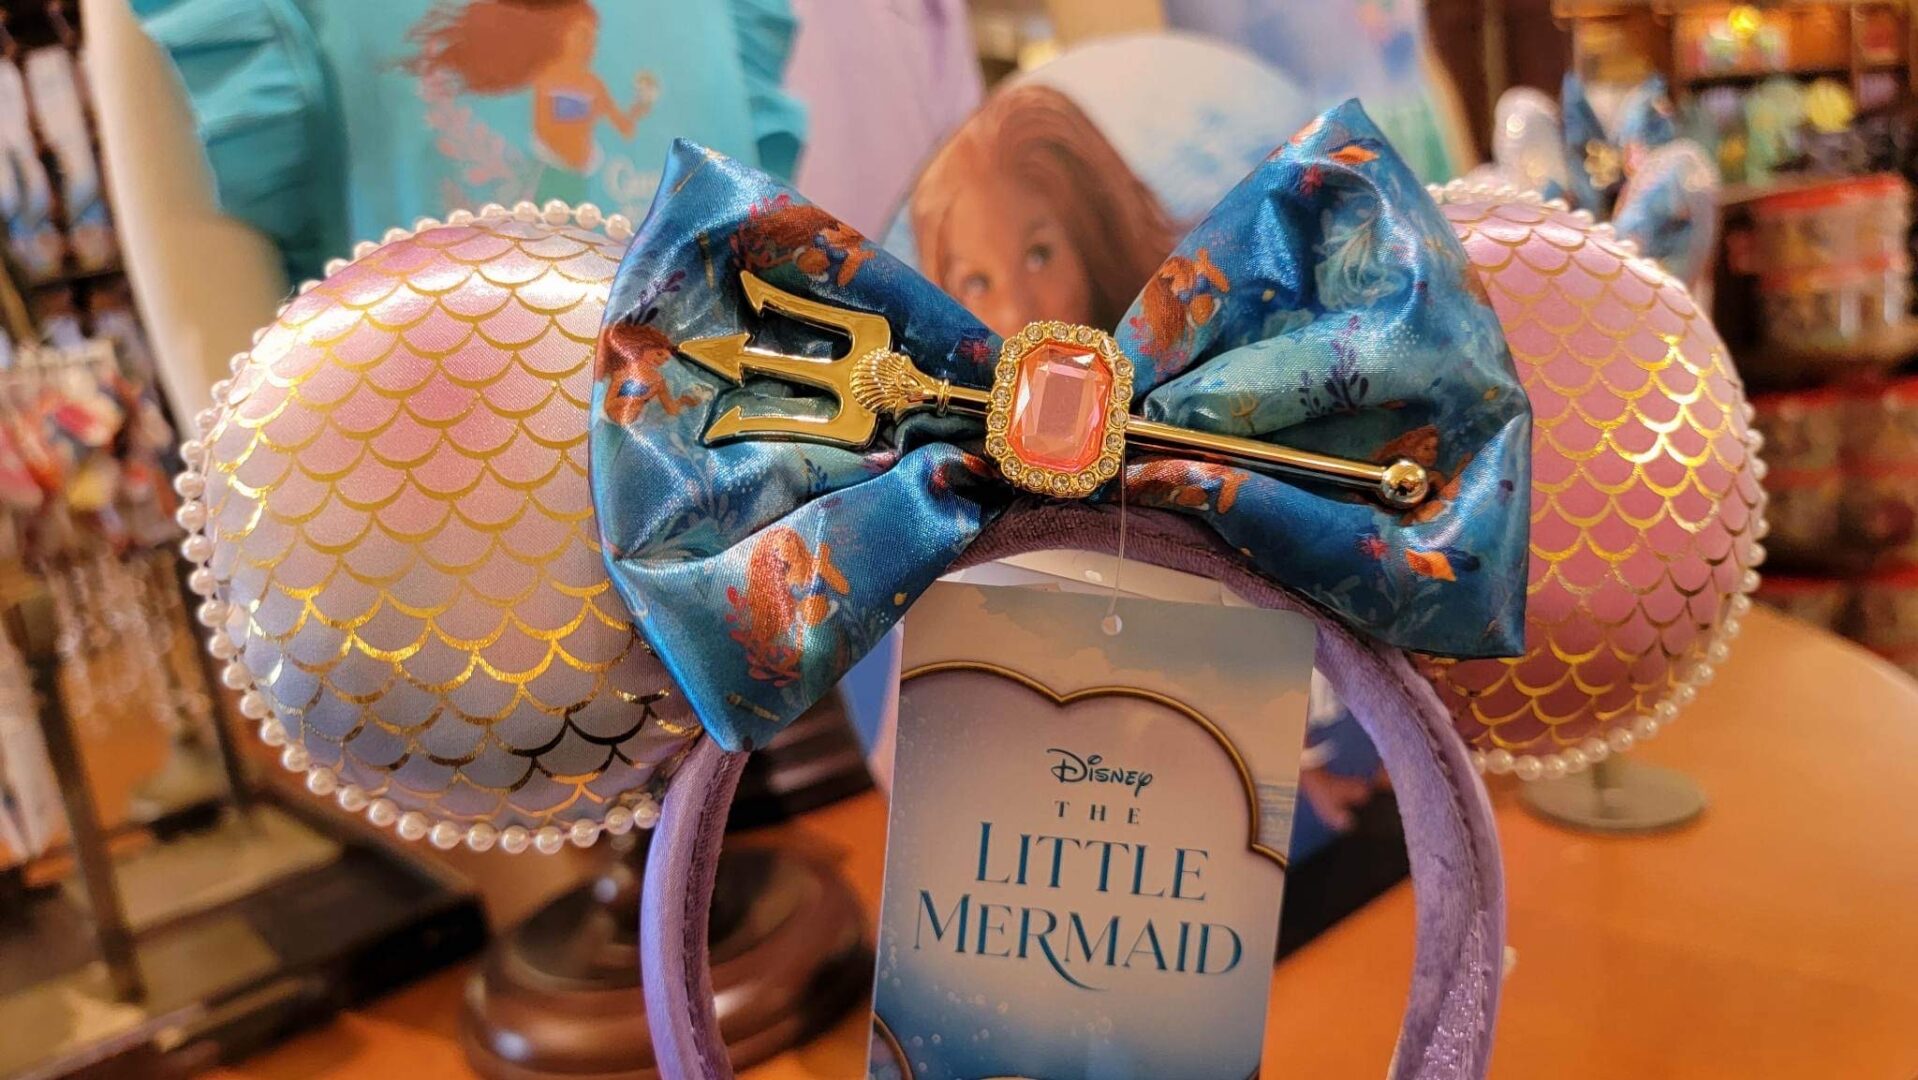 New The Little Mermaid Live Action Minnie Ears Spotted At Magic Kingdom!